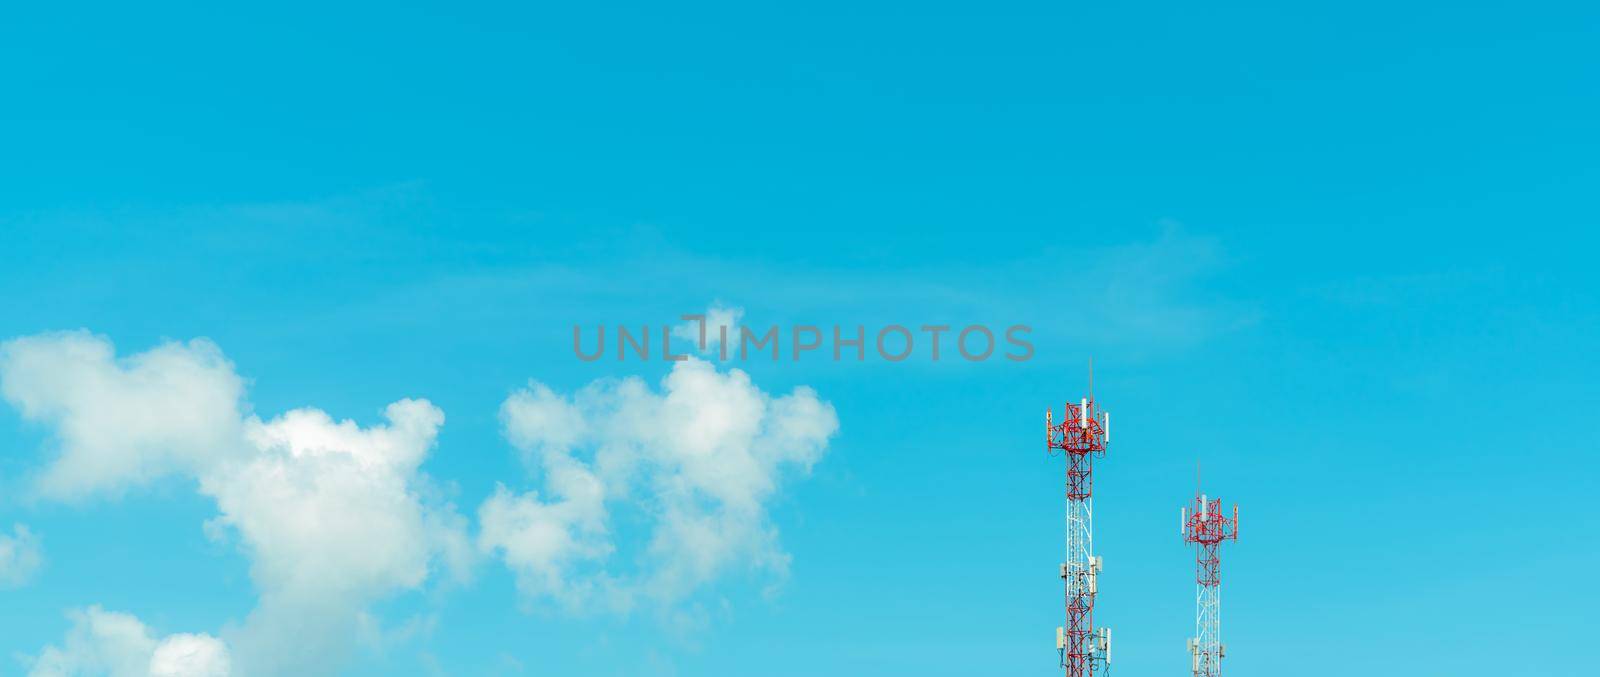 Telecommunication tower with blue sky and white clouds. Radio and satellite pole. Communication technology. Telecommunication industry. Mobile or telecom 4g and 5g network. Telecommunication pylon.